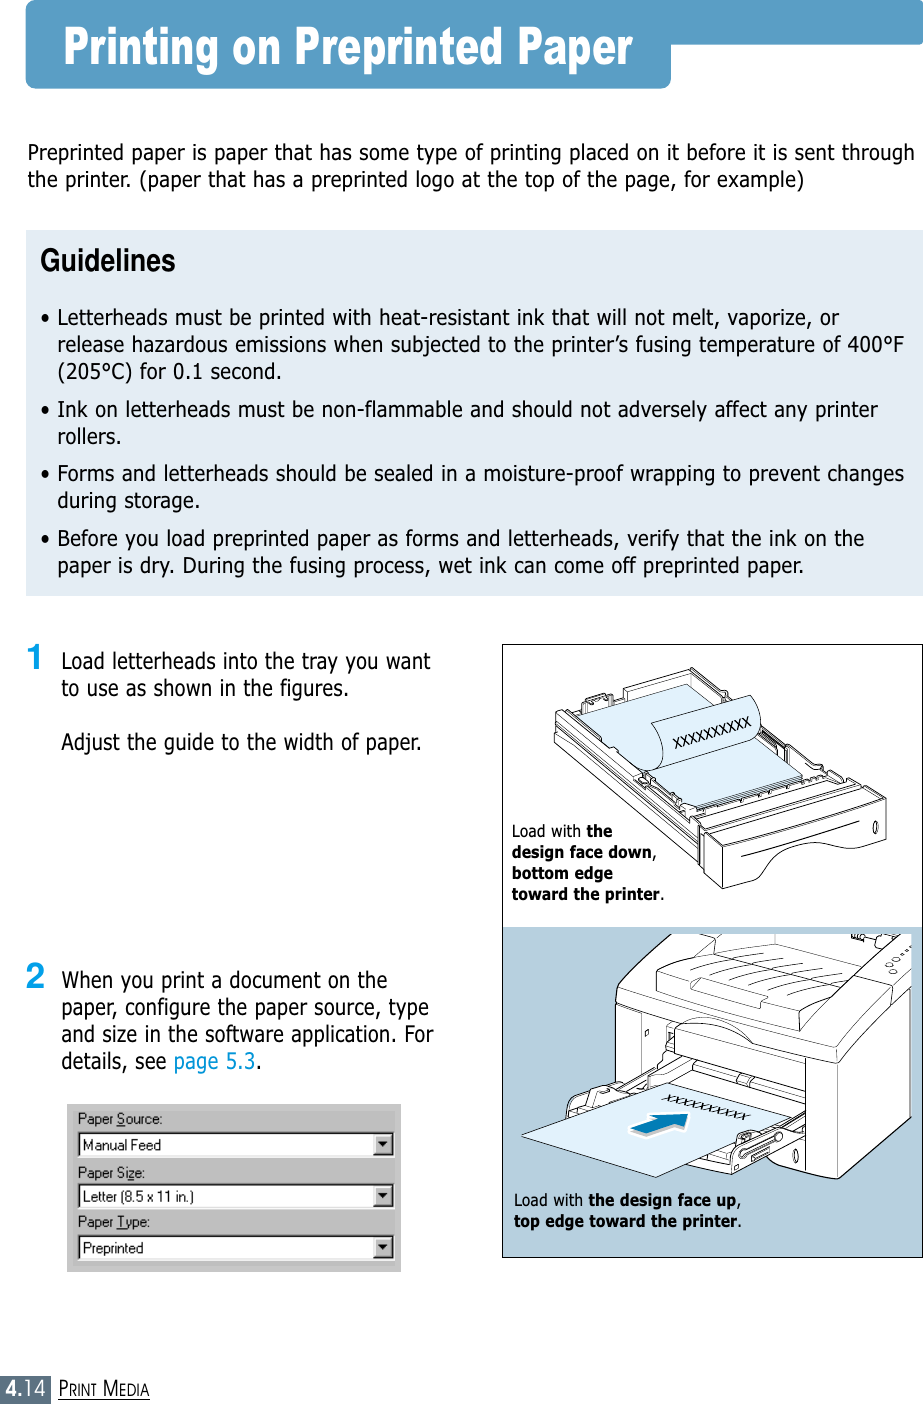 4.14PRINT MEDIAPrinting on Preprinted Paper1Load letterheads into the tray you wantto use as shown in the figures. Adjust the guide to the width of paper.2When you print a document on thepaper, configure the paper source, typeand size in the software application. Fordetails, see page 5.3.Preprinted paper is paper that has some type of printing placed on it before it is sent throughthe printer. (paper that has a preprinted logo at the top of the page, for example)Guidelines• Letterheads must be printed with heat-resistant ink that will not melt, vaporize, orrelease hazardous emissions when subjected to the printer’s fusing temperature of 400°F(205°C) for 0.1 second.• Ink on letterheads must be non-flammable and should not adversely affect any printerrollers.• Forms and letterheads should be sealed in a moisture-proof wrapping to prevent changesduring storage.• Before you load preprinted paper as forms and letterheads, verify that the ink on thepaper is dry. During the fusing process, wet ink can come off preprinted paper.Load with the design face up, top edge toward the printer.Load with the design face down,bottom edge toward the printer.